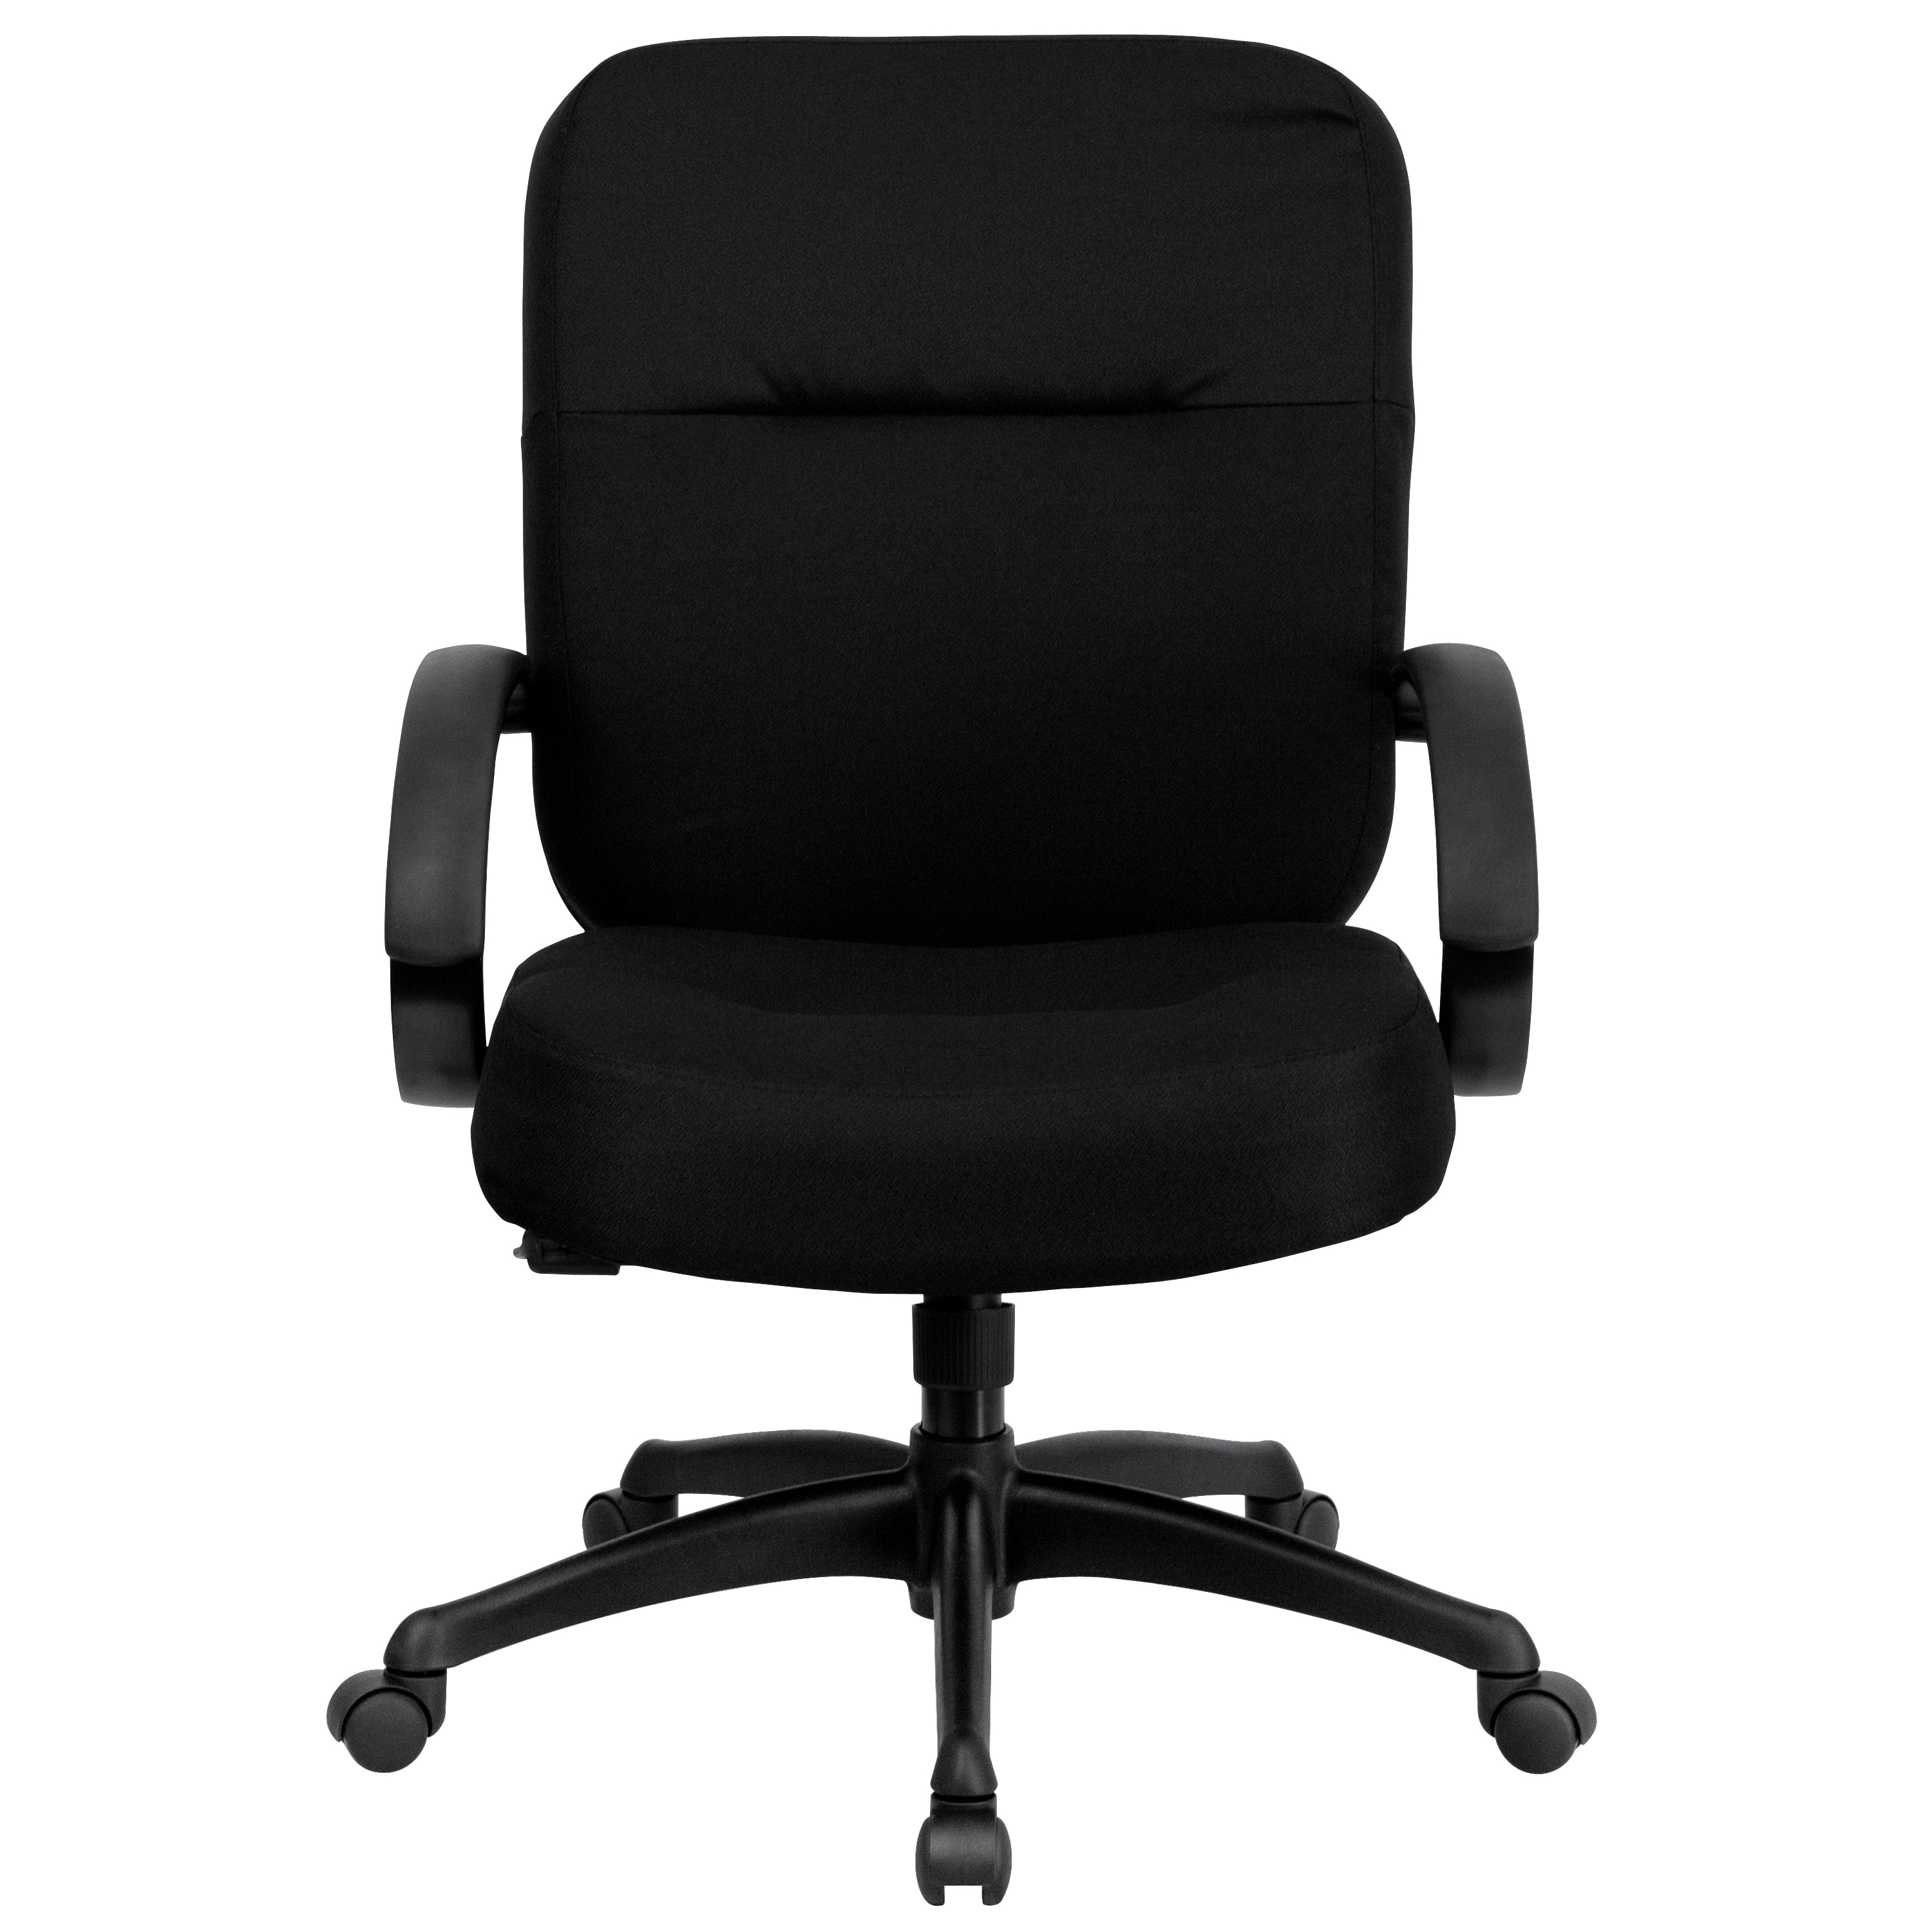 https://ak1.ostkcdn.com/images/products/11627478/Werth-Big-and-Tall-Black-Fabric-Executive-Swivel-Office-Chair-with-Extra-Wide-Seat-and-Height-Adjustable-Arms-29751e9f-286f-4101-a248-051baa25050e.jpg